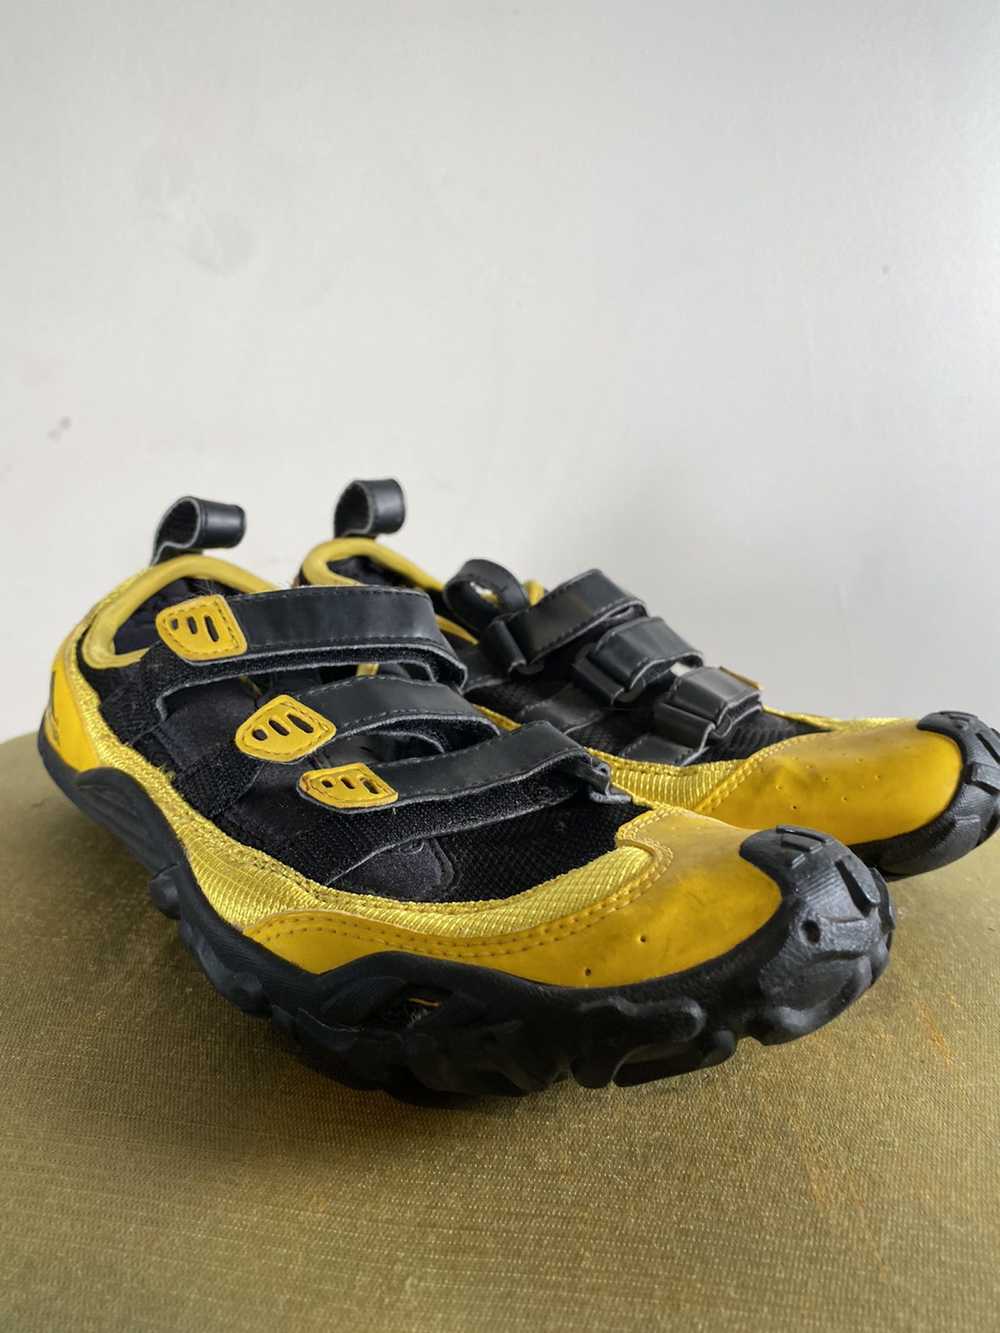 Vintage Velcro Water Shoes - image 9